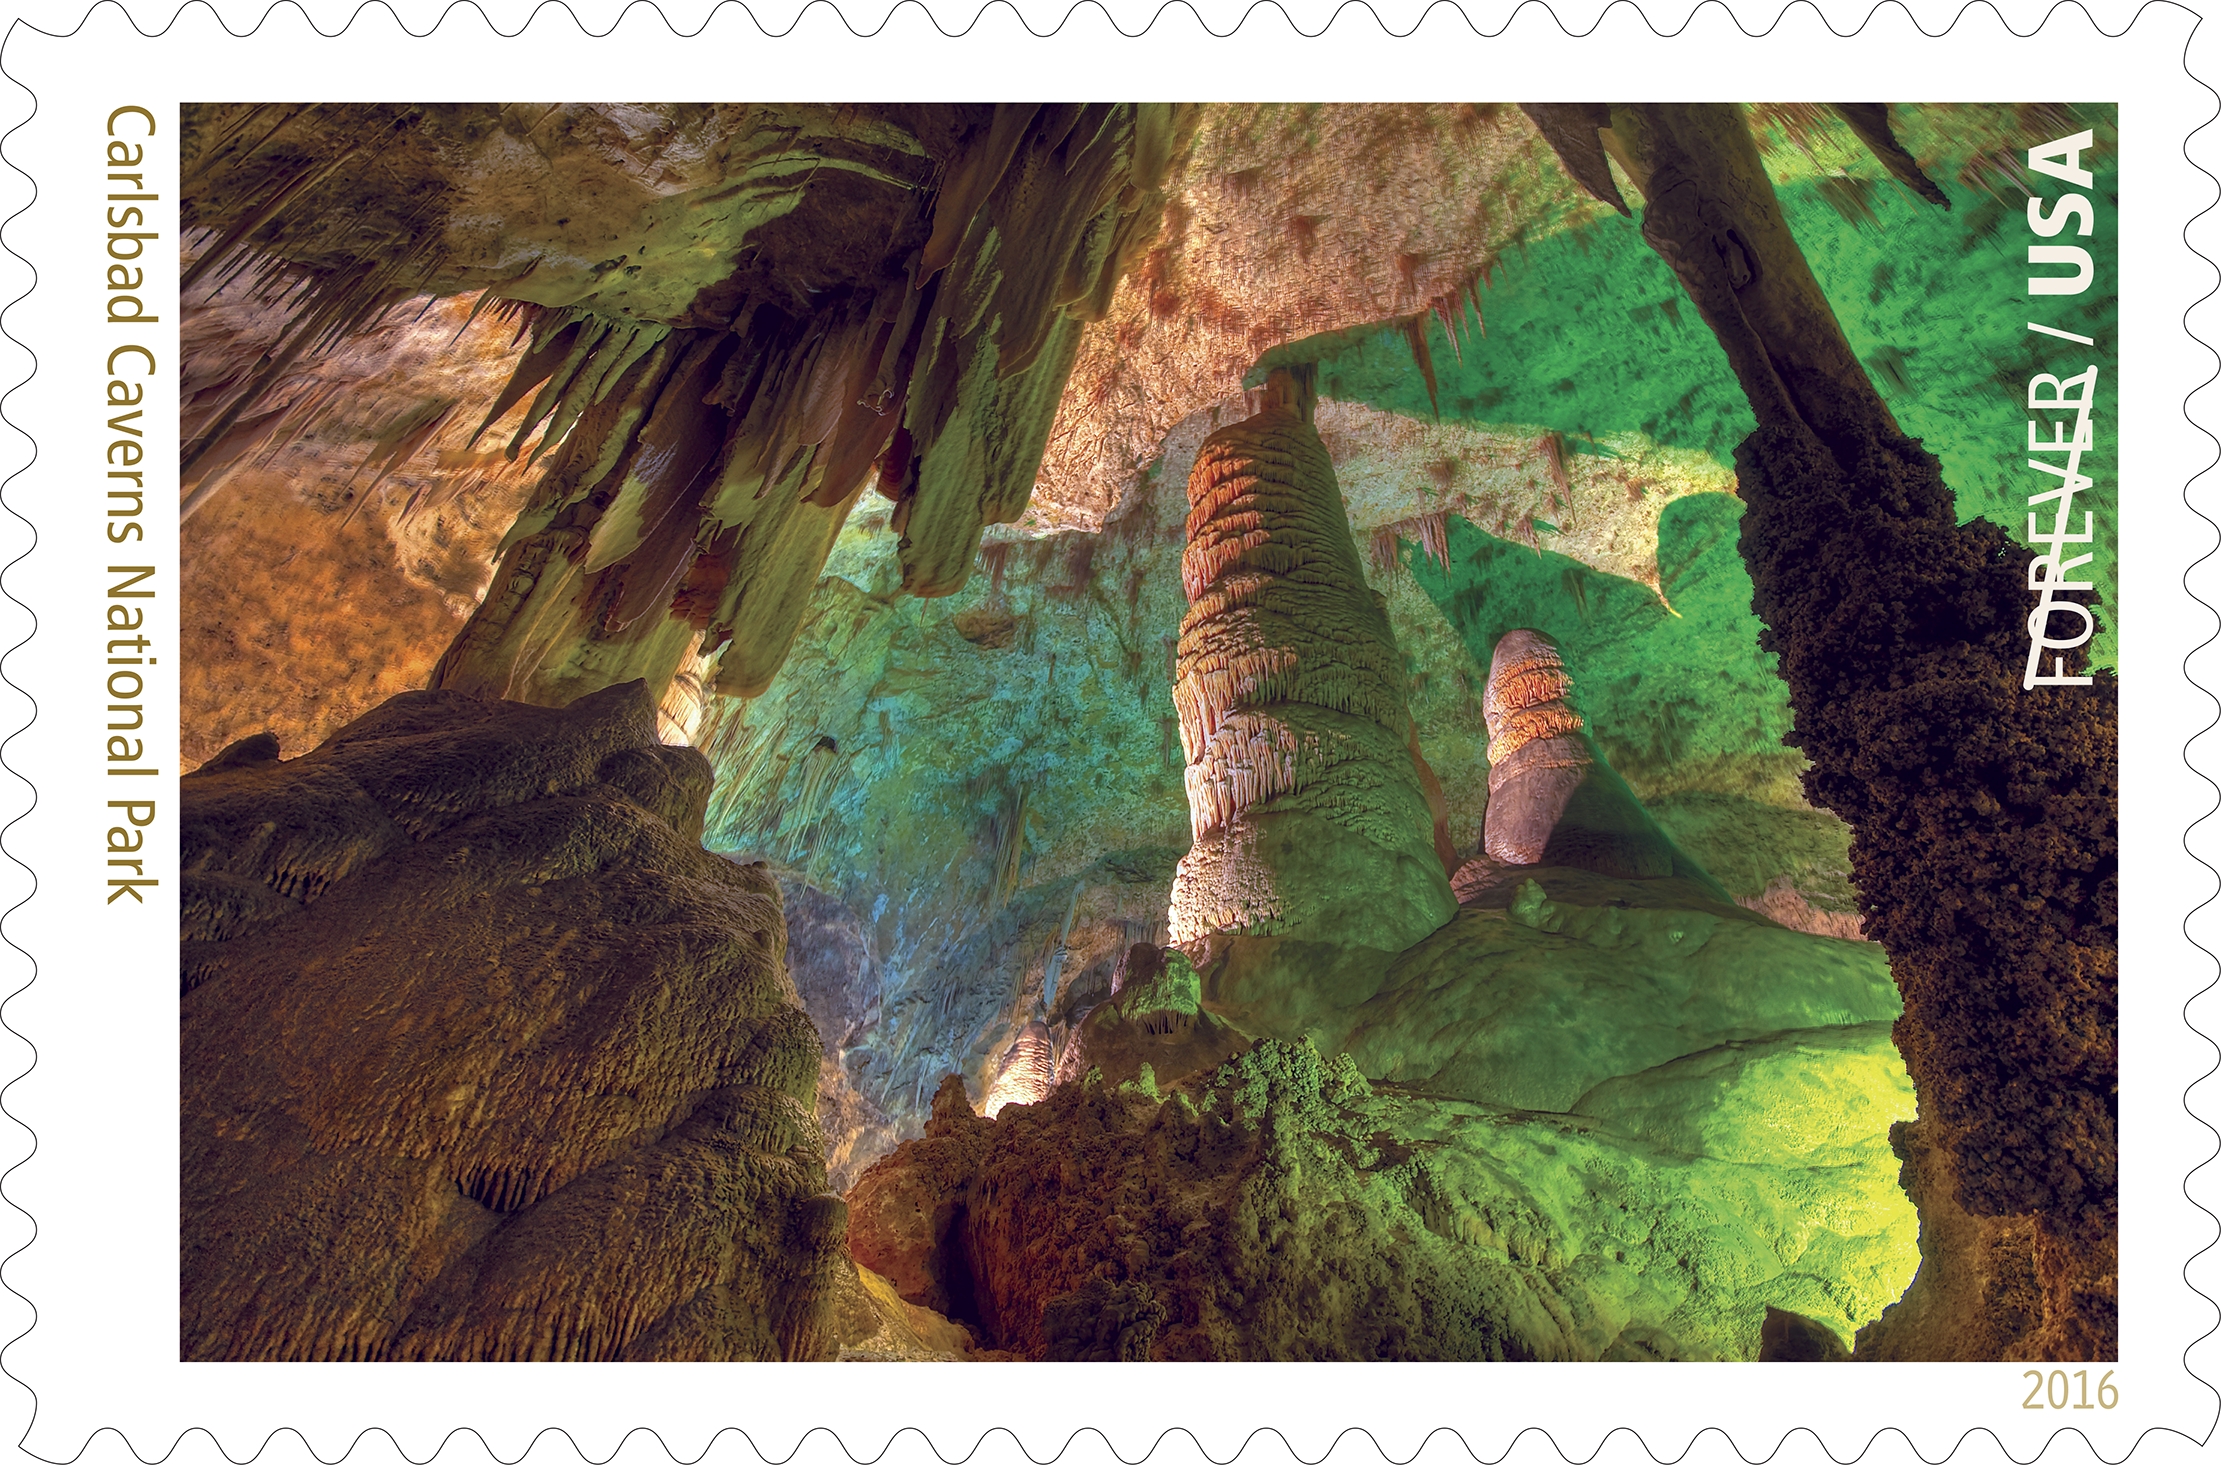 Carlsbad Caverns is 5th stamp celebrated in National Parks series